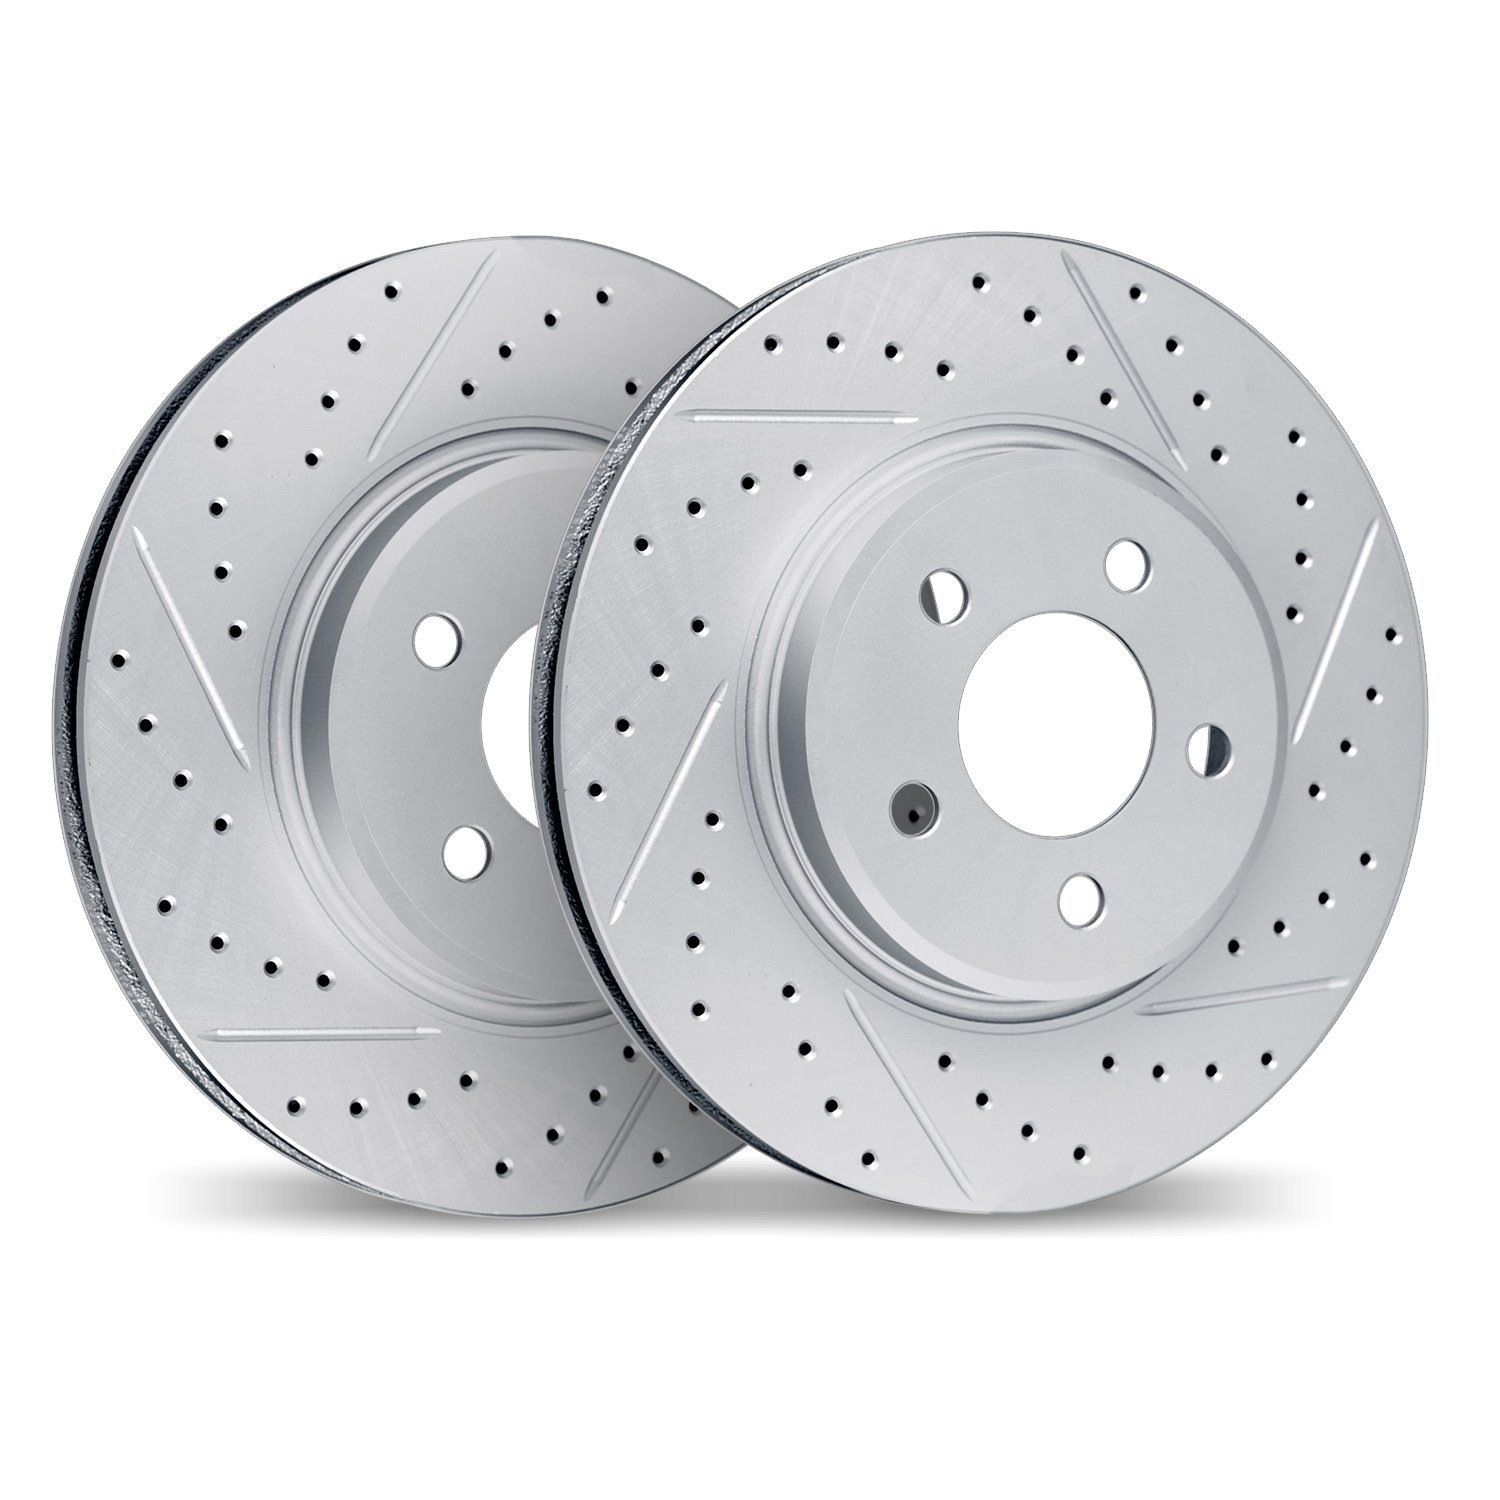 2002-63010 Geoperformance Drilled/Slotted Brake Rotors, Fits Select Mercedes-Benz, Position: Front